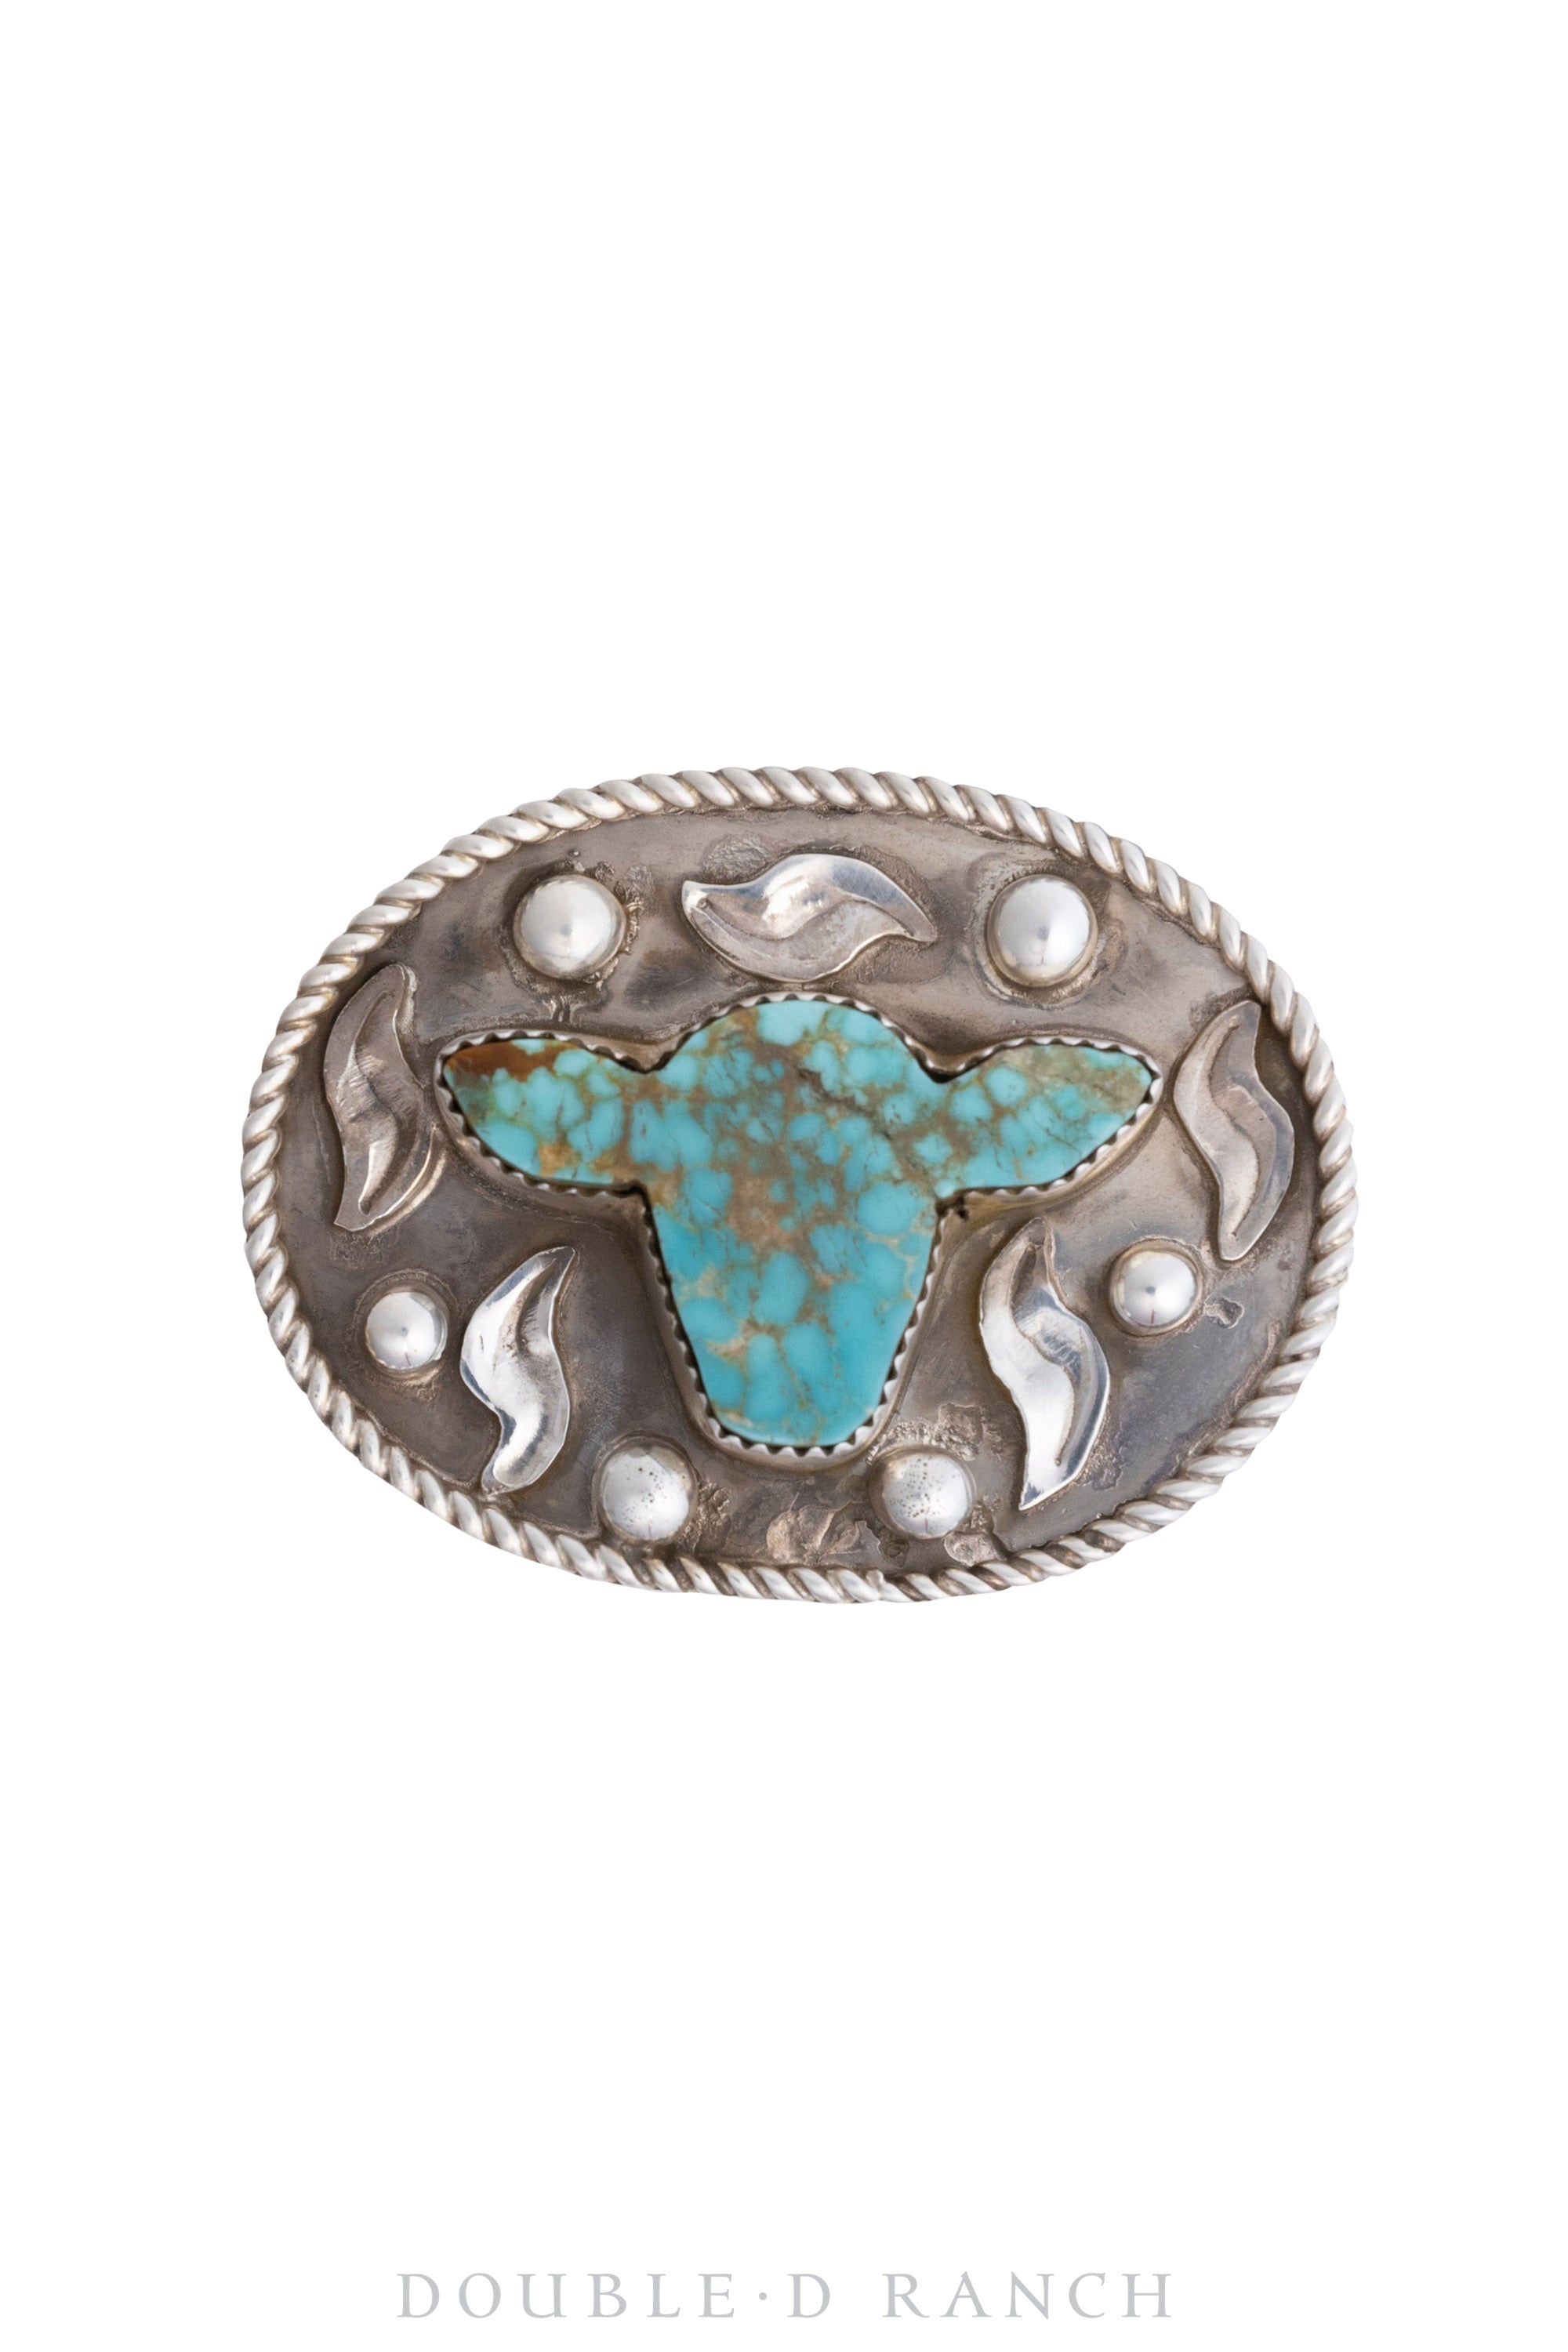 Ring, Novelty, Buckle, Turquoise, Sterling Silver, Hallmark, Contemporary, 1223